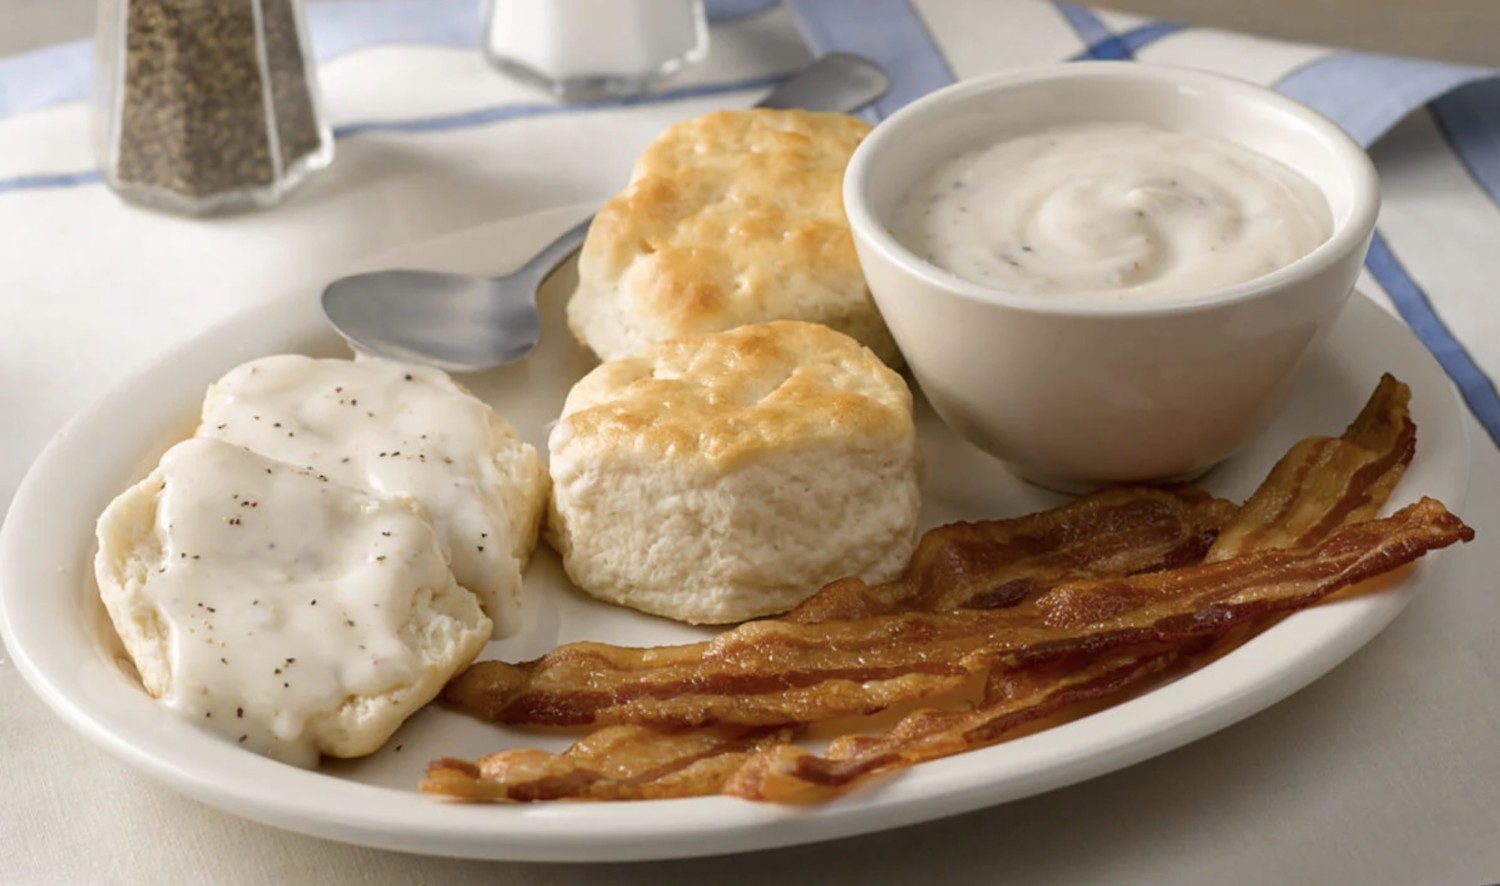 Cracker Barrel Biscuit Recipe Tastes Just Like The Ones At The Restaurant